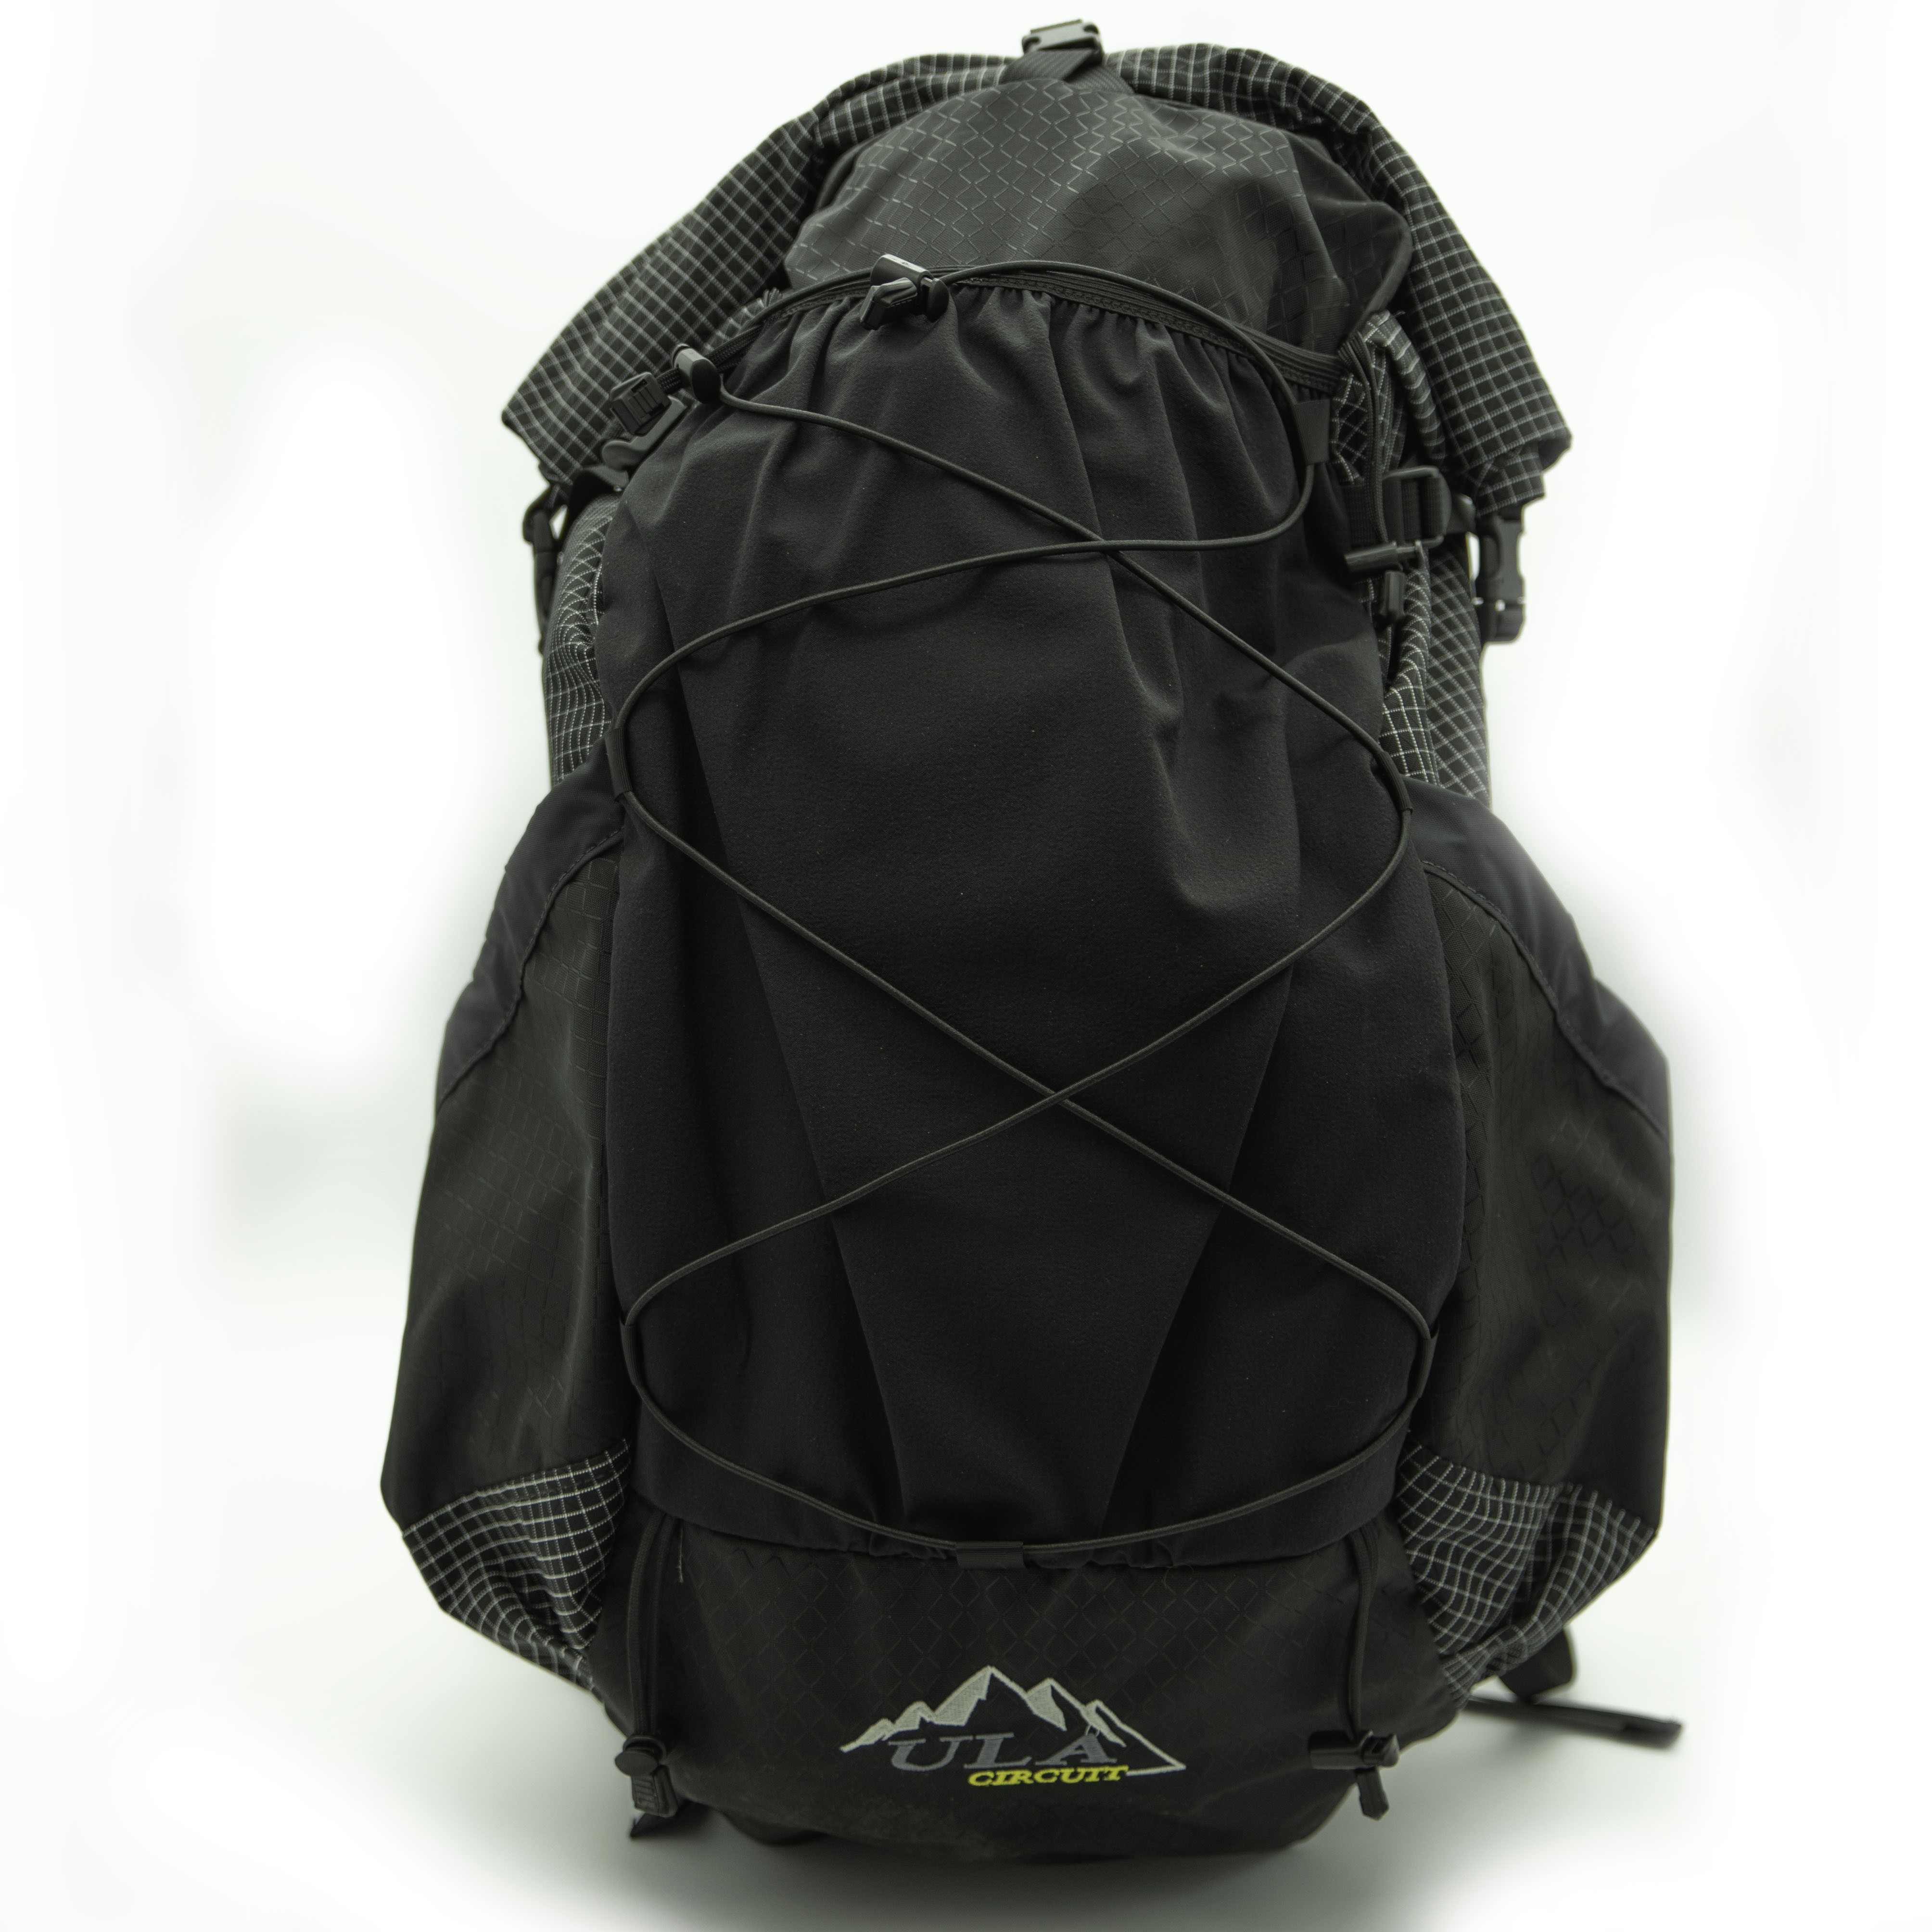 Shop for ULA Circuit backpacks - Find information and reviews